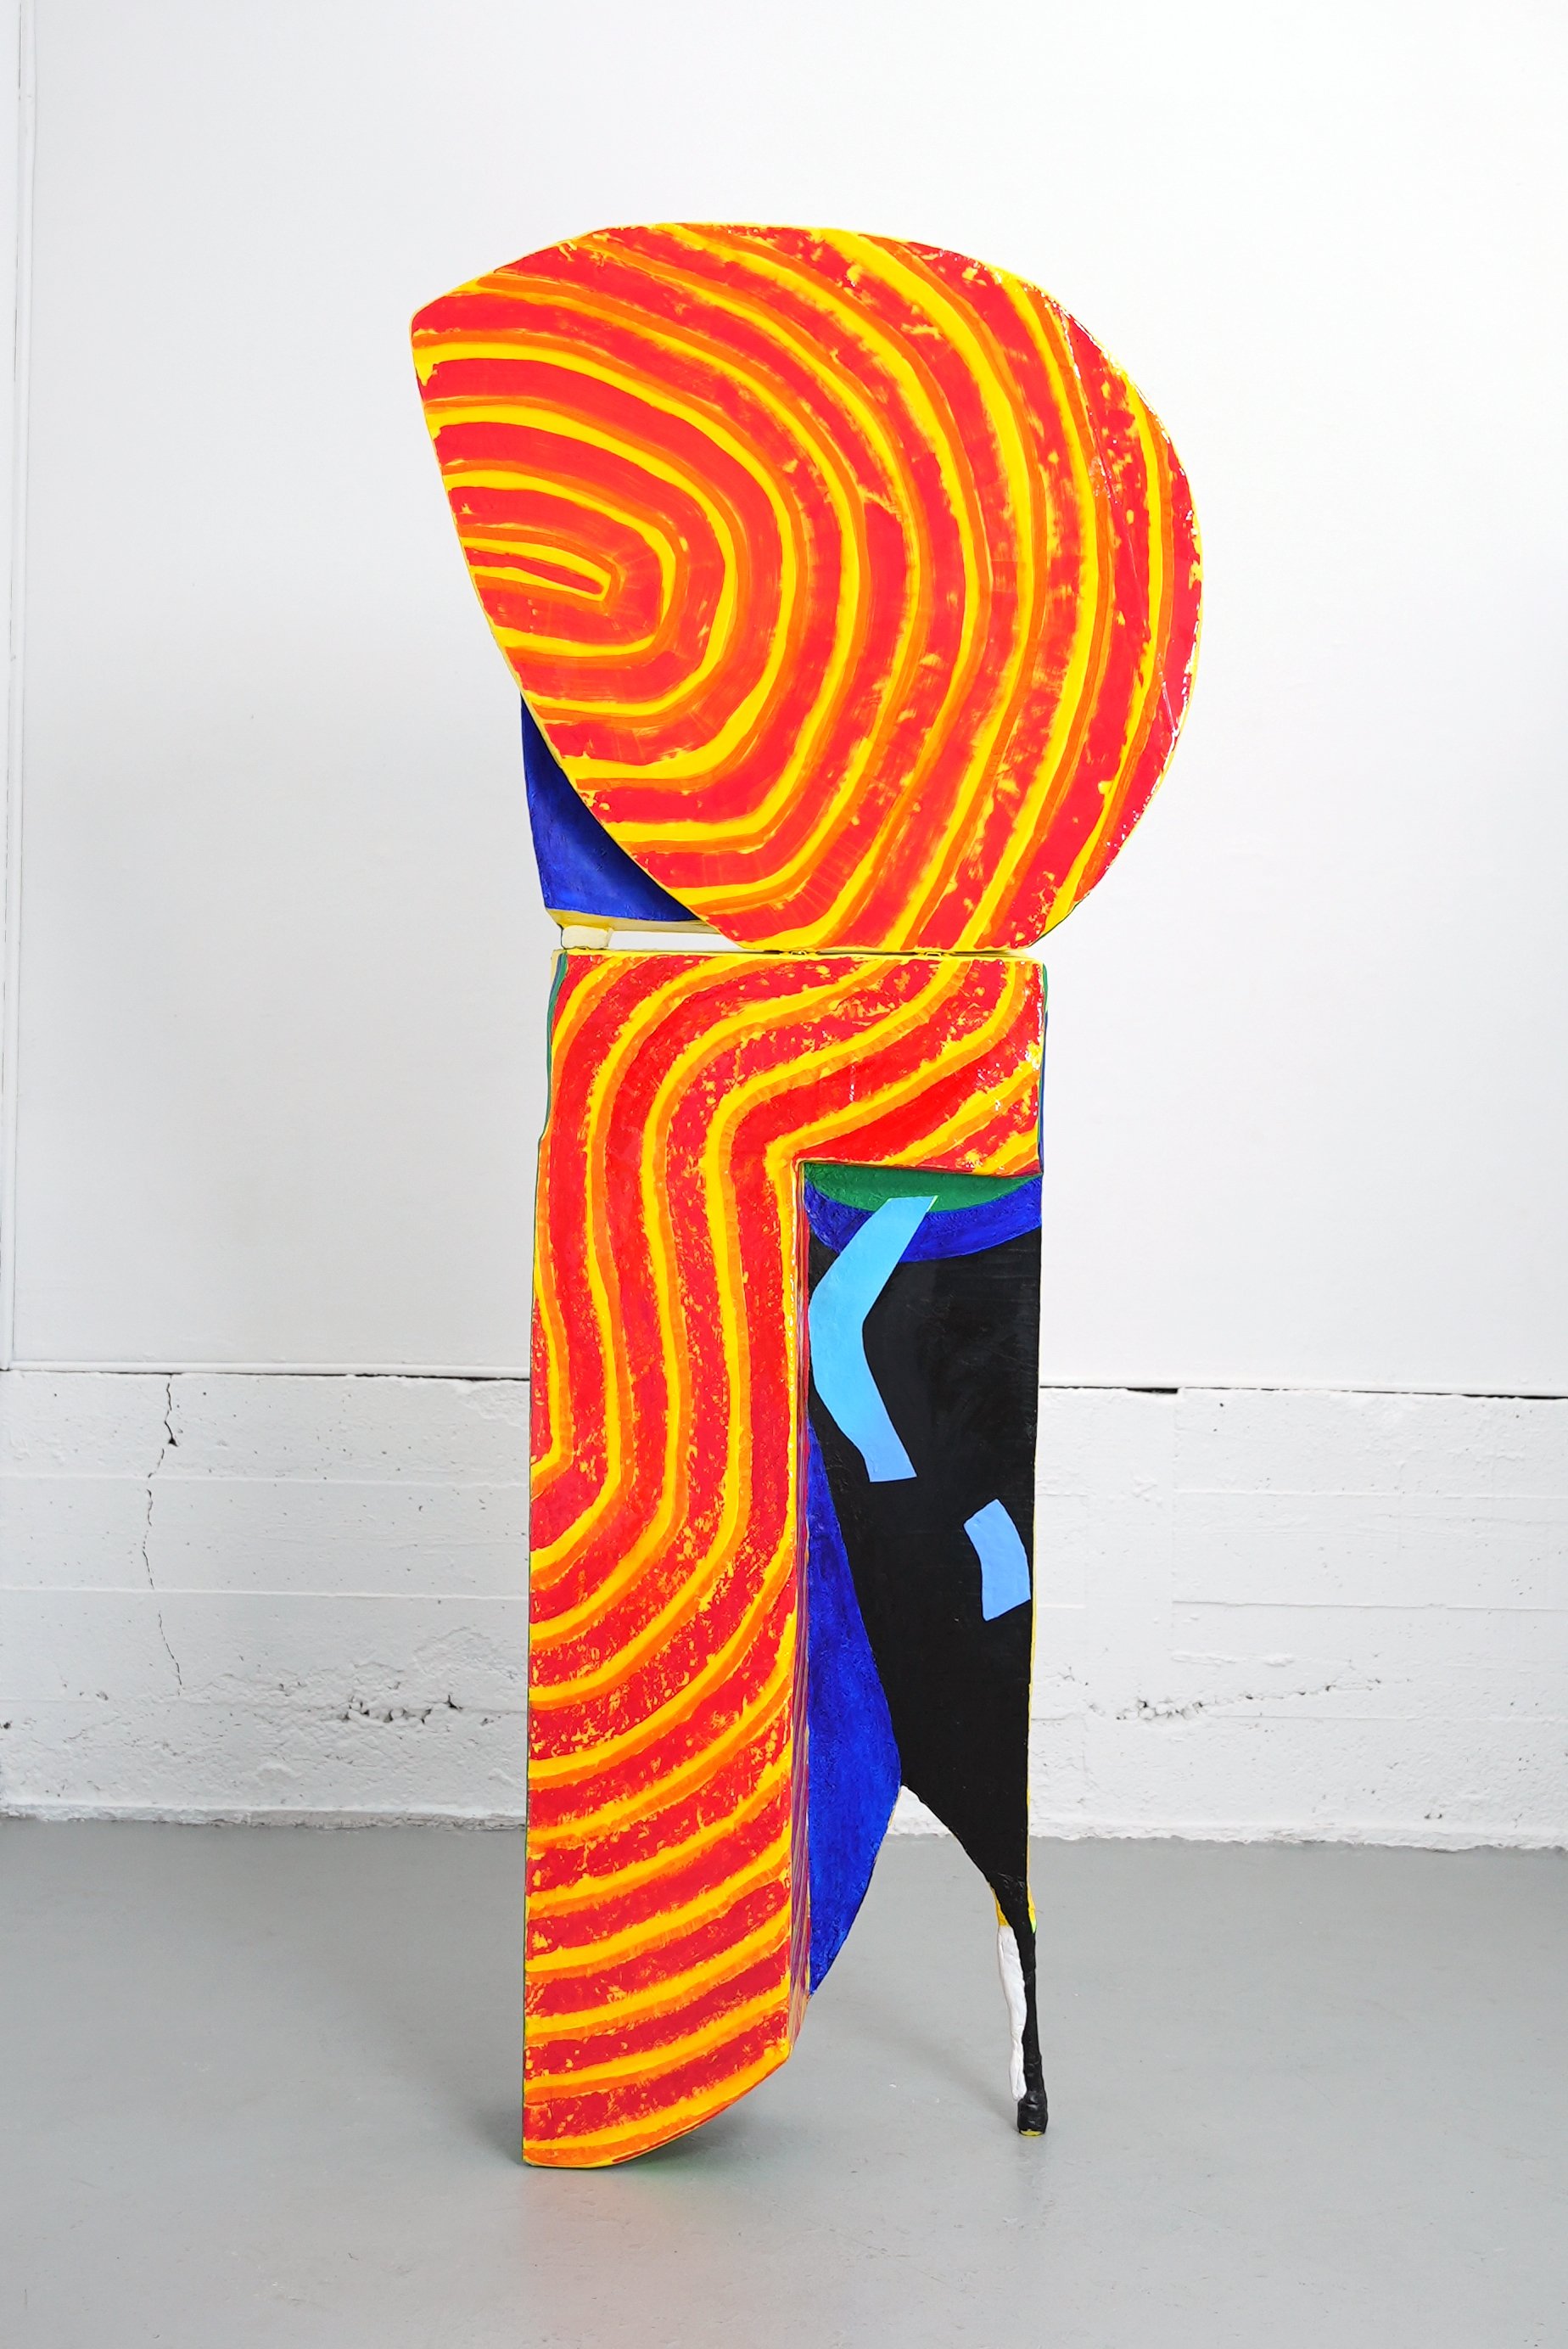   Panoply , Acrylic, Spray Paint, Fiberglass, Polymer, Tar from Indiana University Roof, Bloomington, IN, Wood from Elizabeth Murray’s Farm, Granville, NY, 91”x30”x12”, 2023 